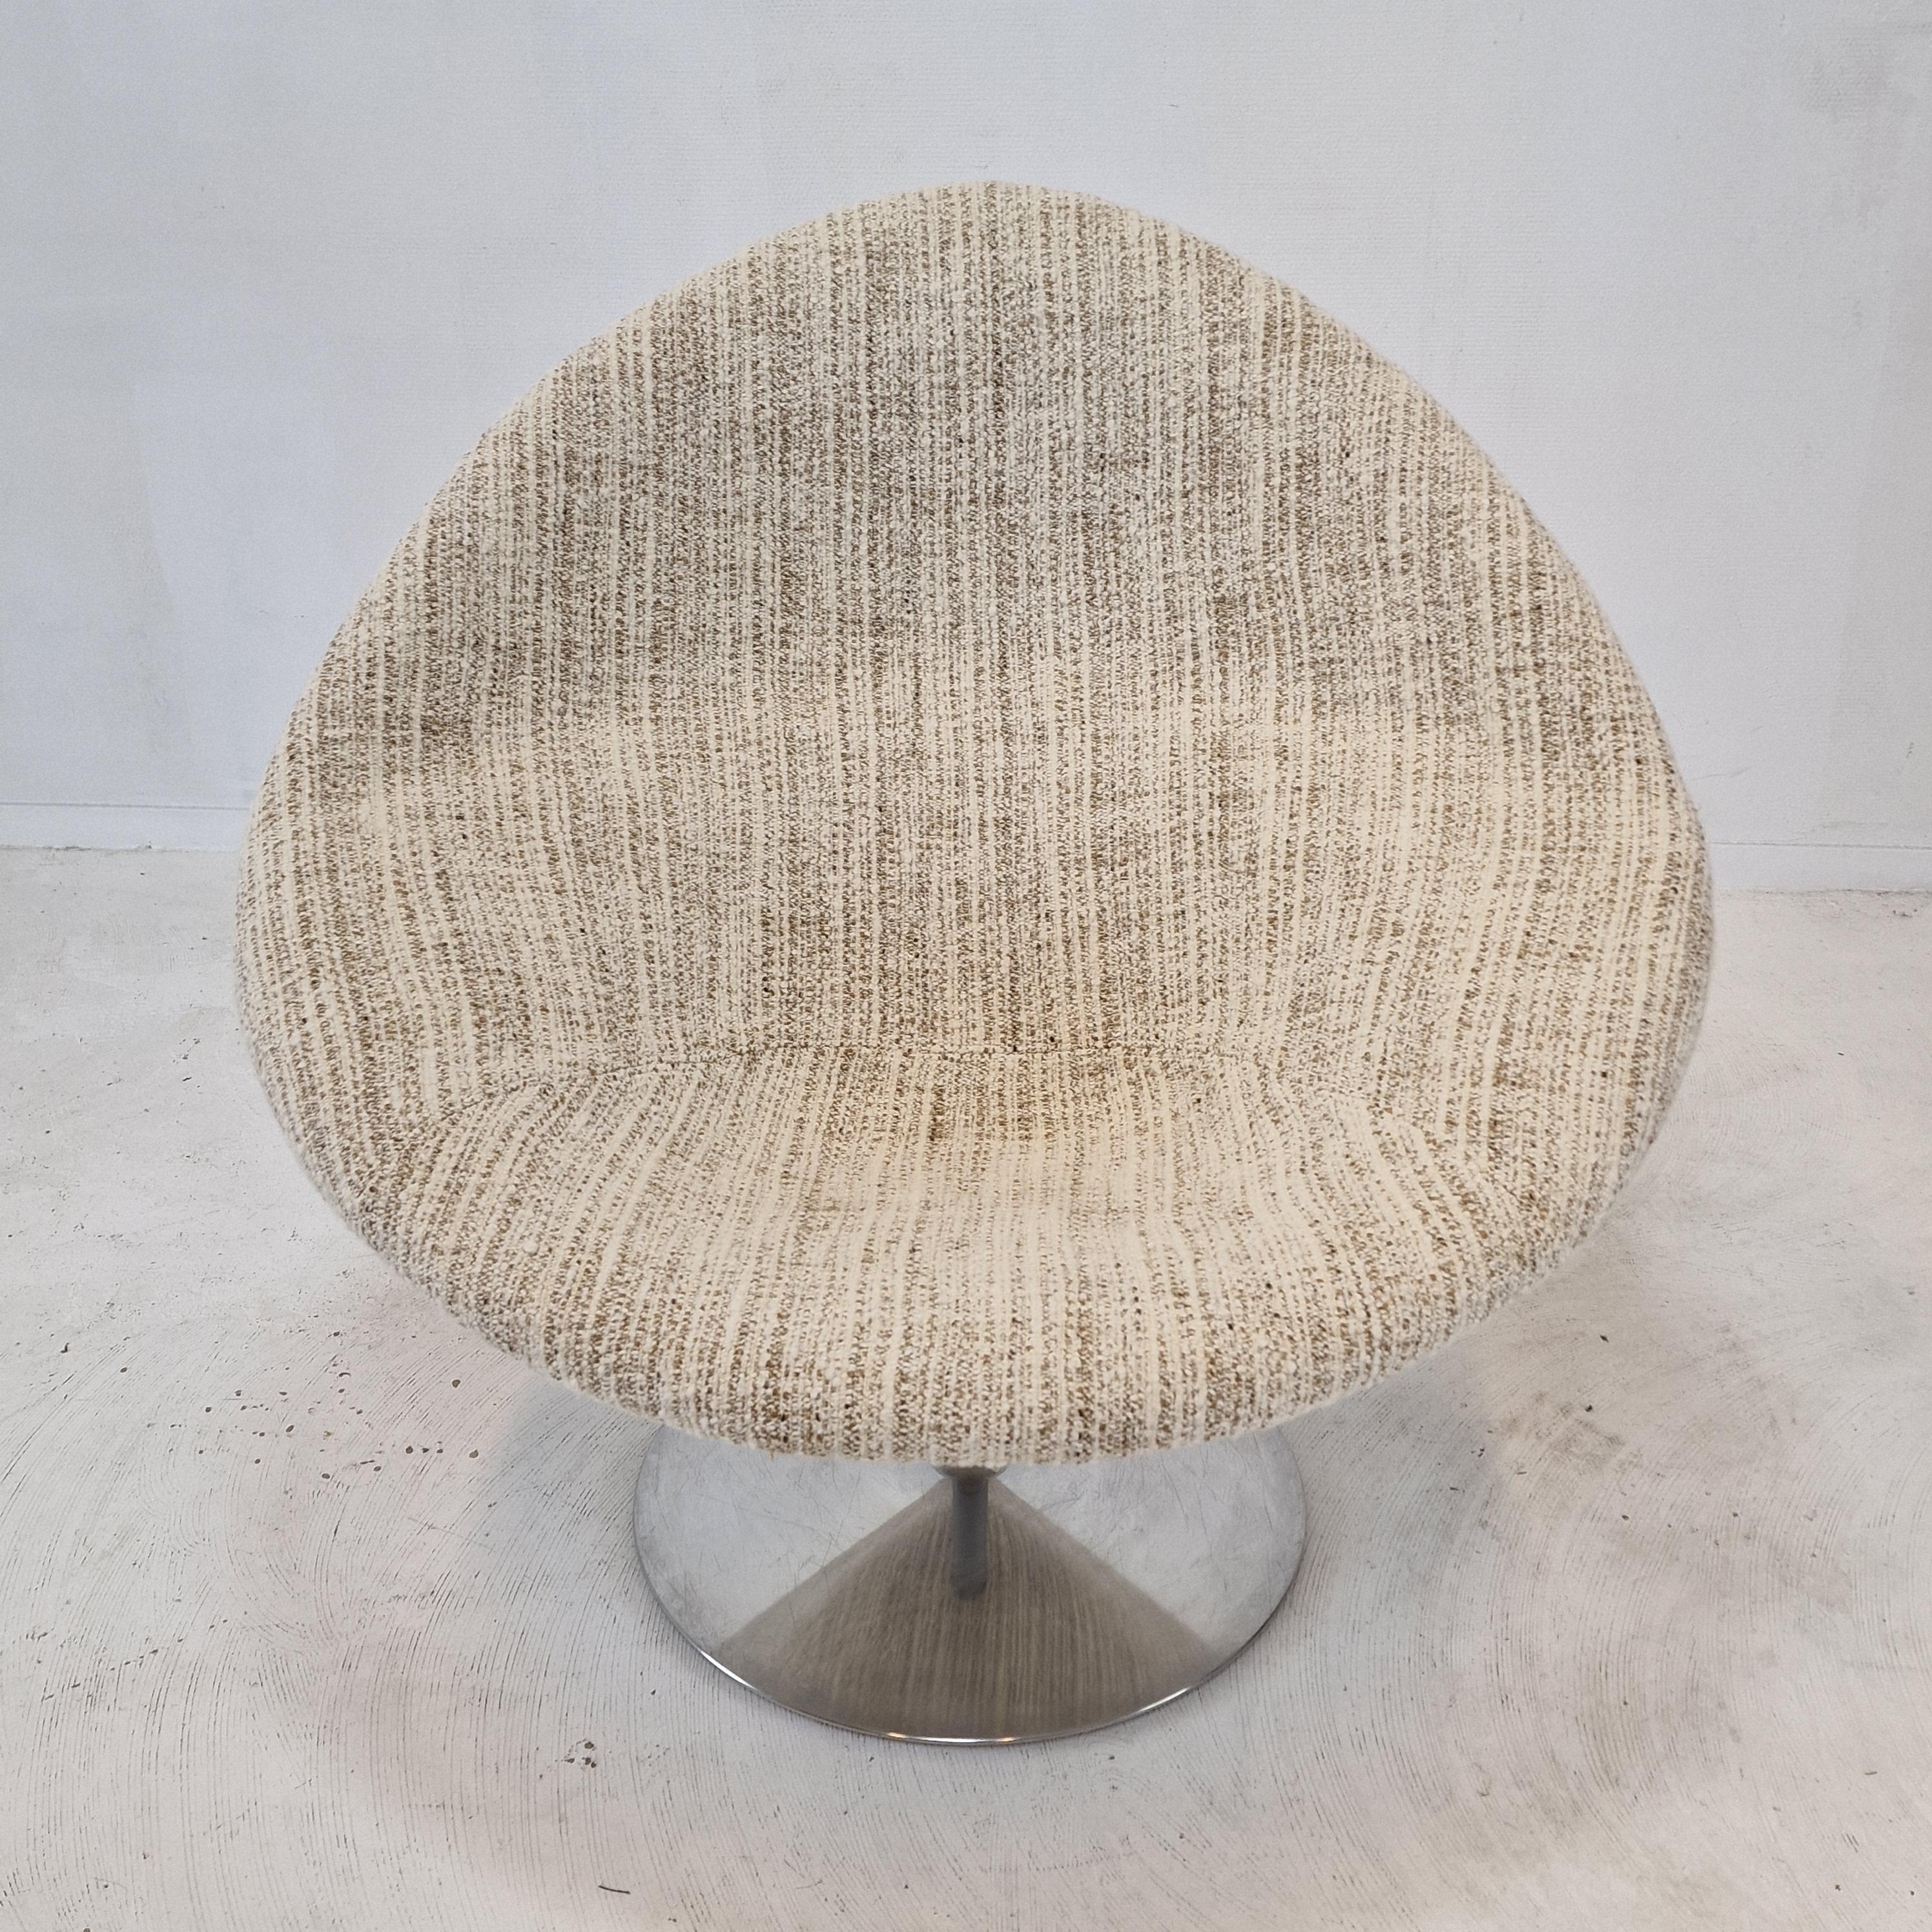 Dutch Midcentury Big Globe Armchair with Ottoman by Pierre Paulin for Artifort, 1970s For Sale